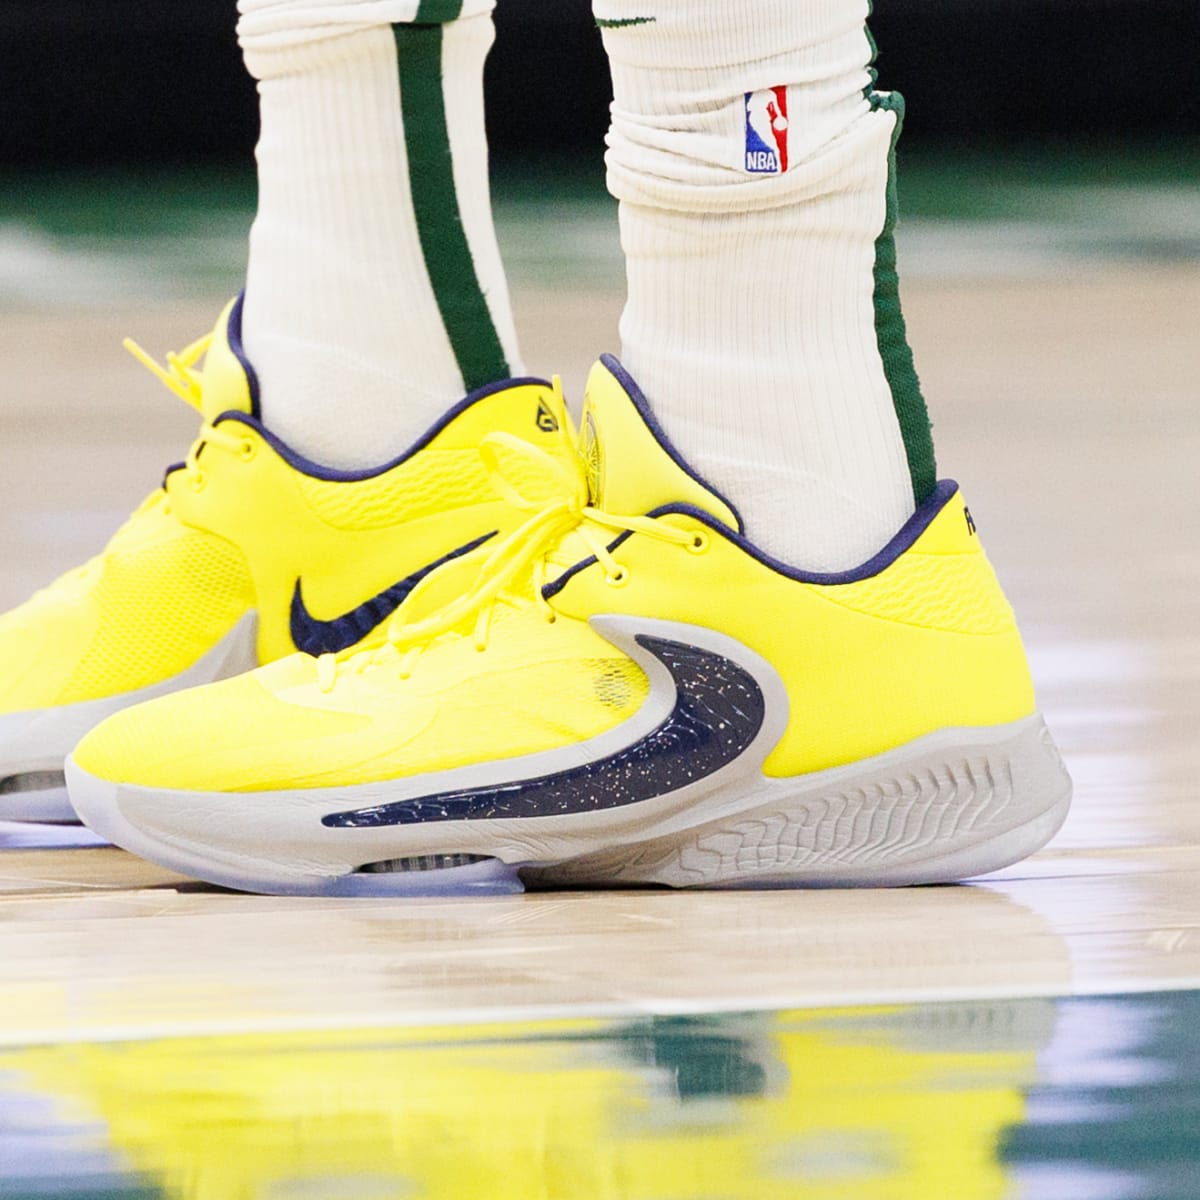 kruising Seminarie prioriteit Highlighting Four New Shoes Worn in the NBA Last Night - Sports Illustrated  FanNation Kicks News, Analysis and More